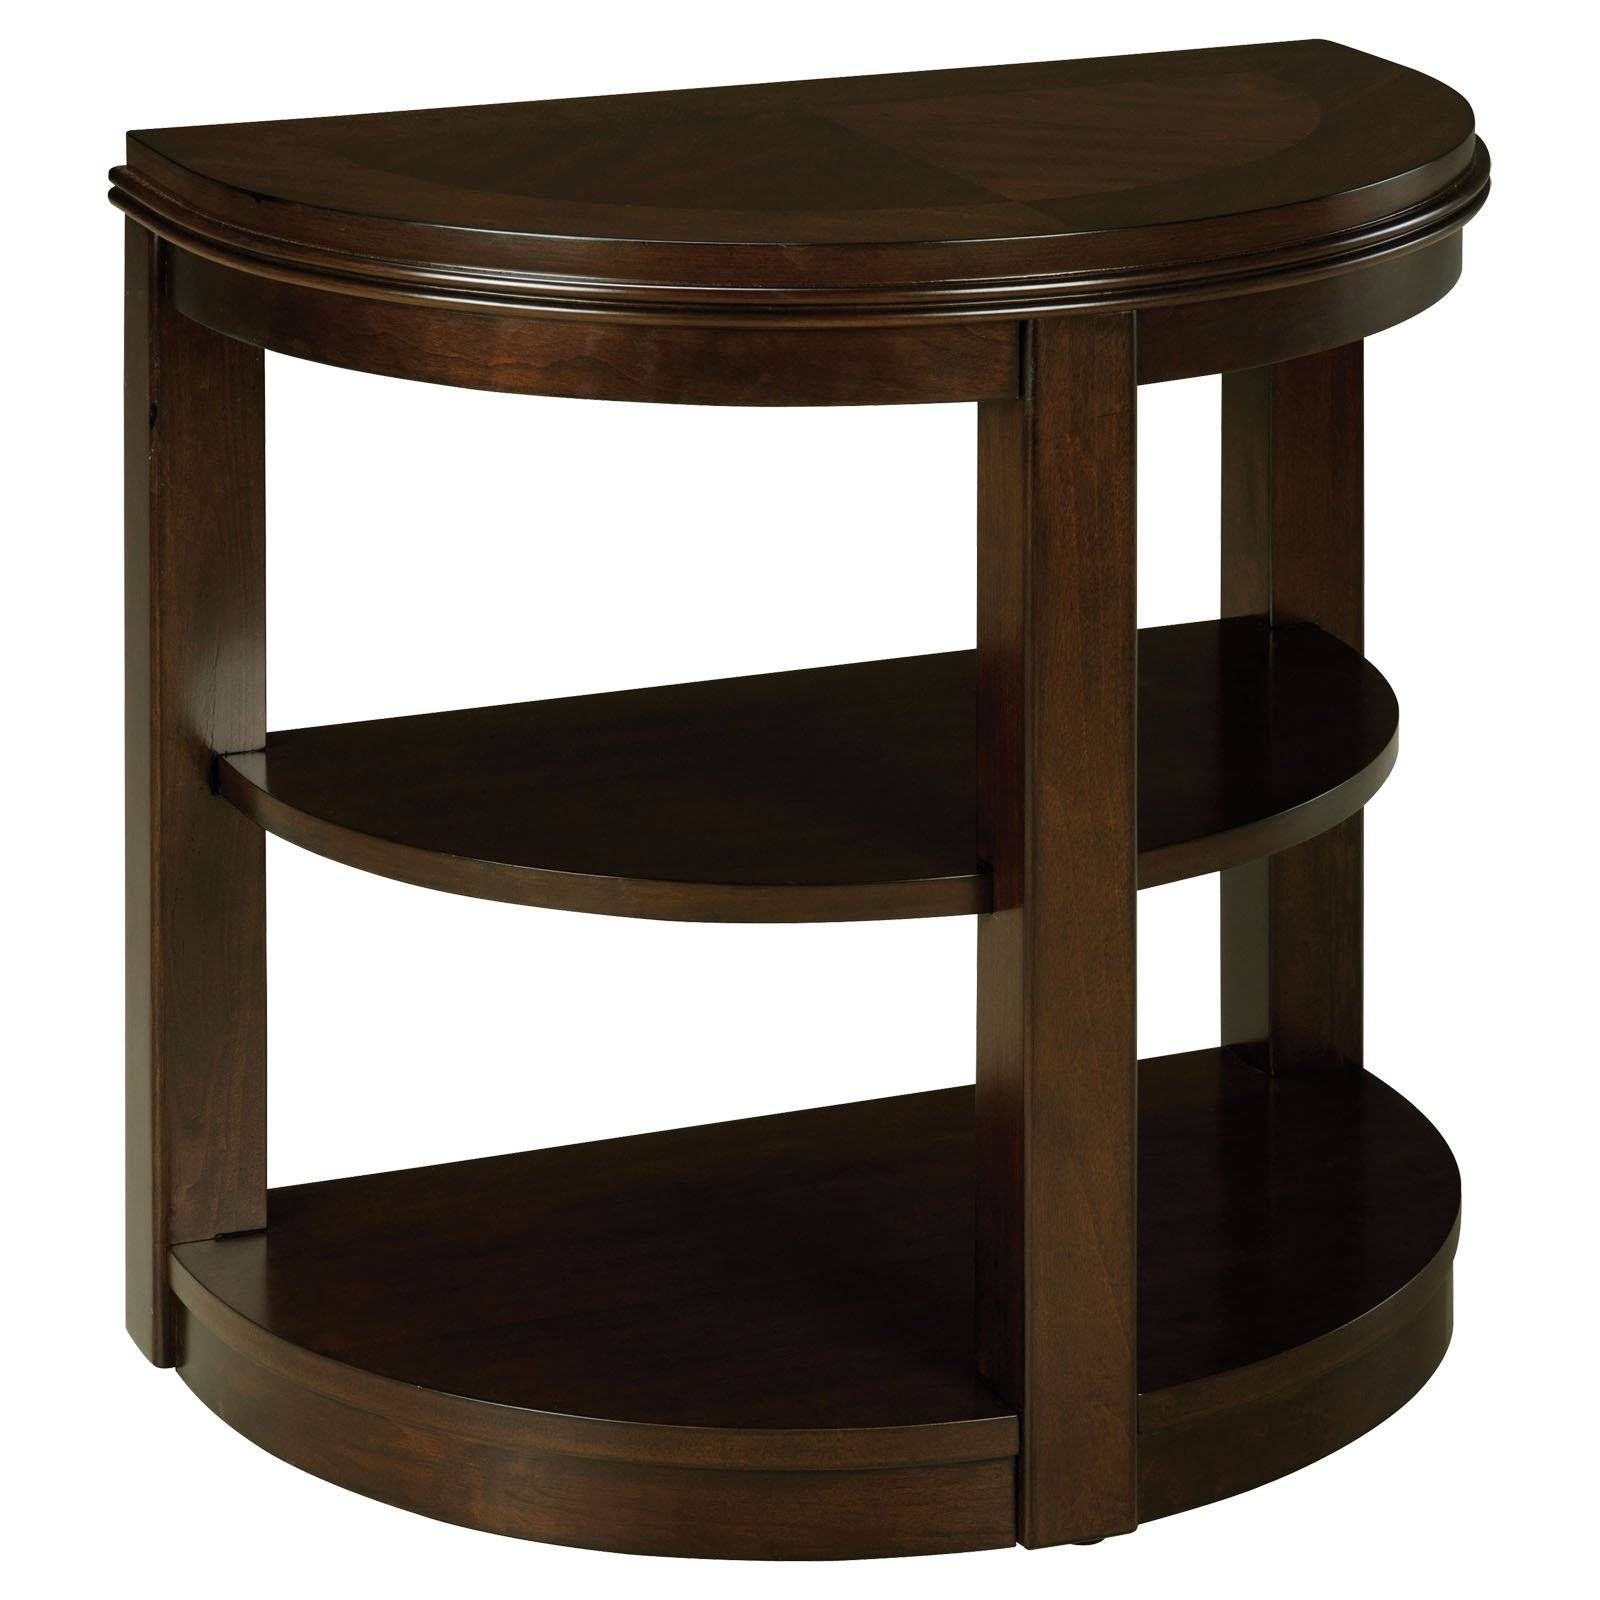 Half Round Accent Table Within Half Circle Coffee Tables (View 4 of 30)